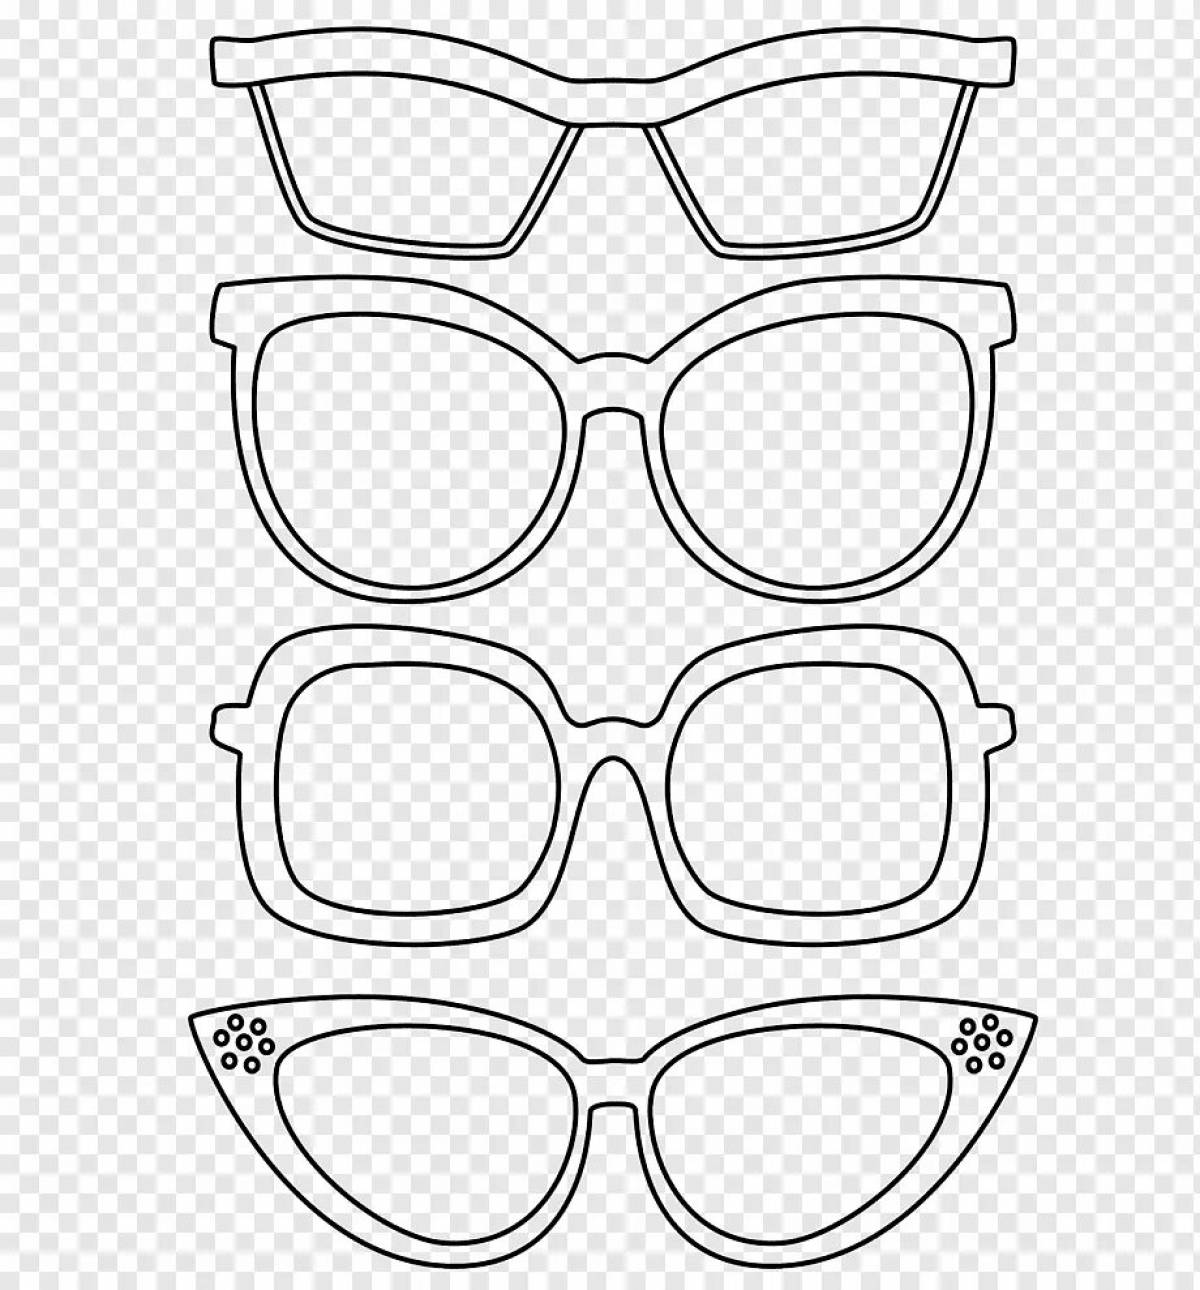 Adorable glasses coloring book for babies